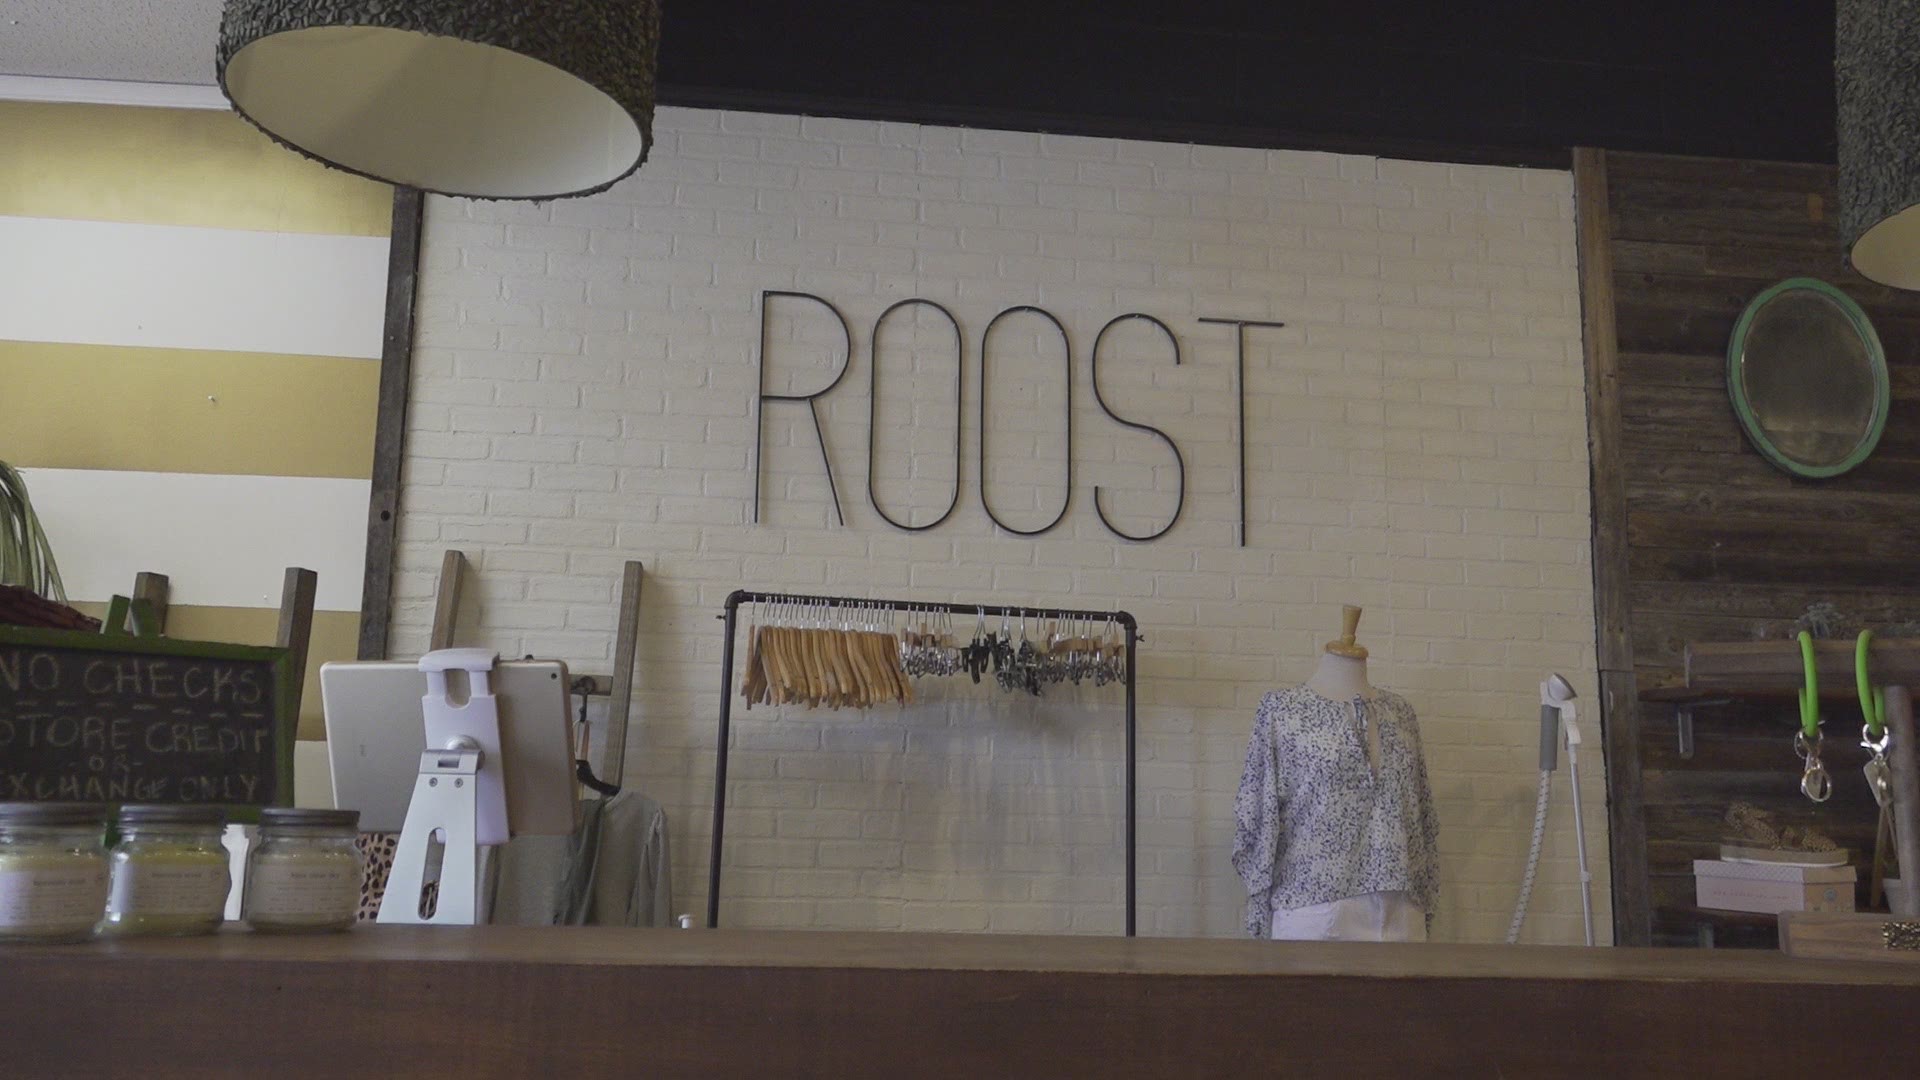 West Texas businesses have seen a shortage in change, but some are affected more than others.